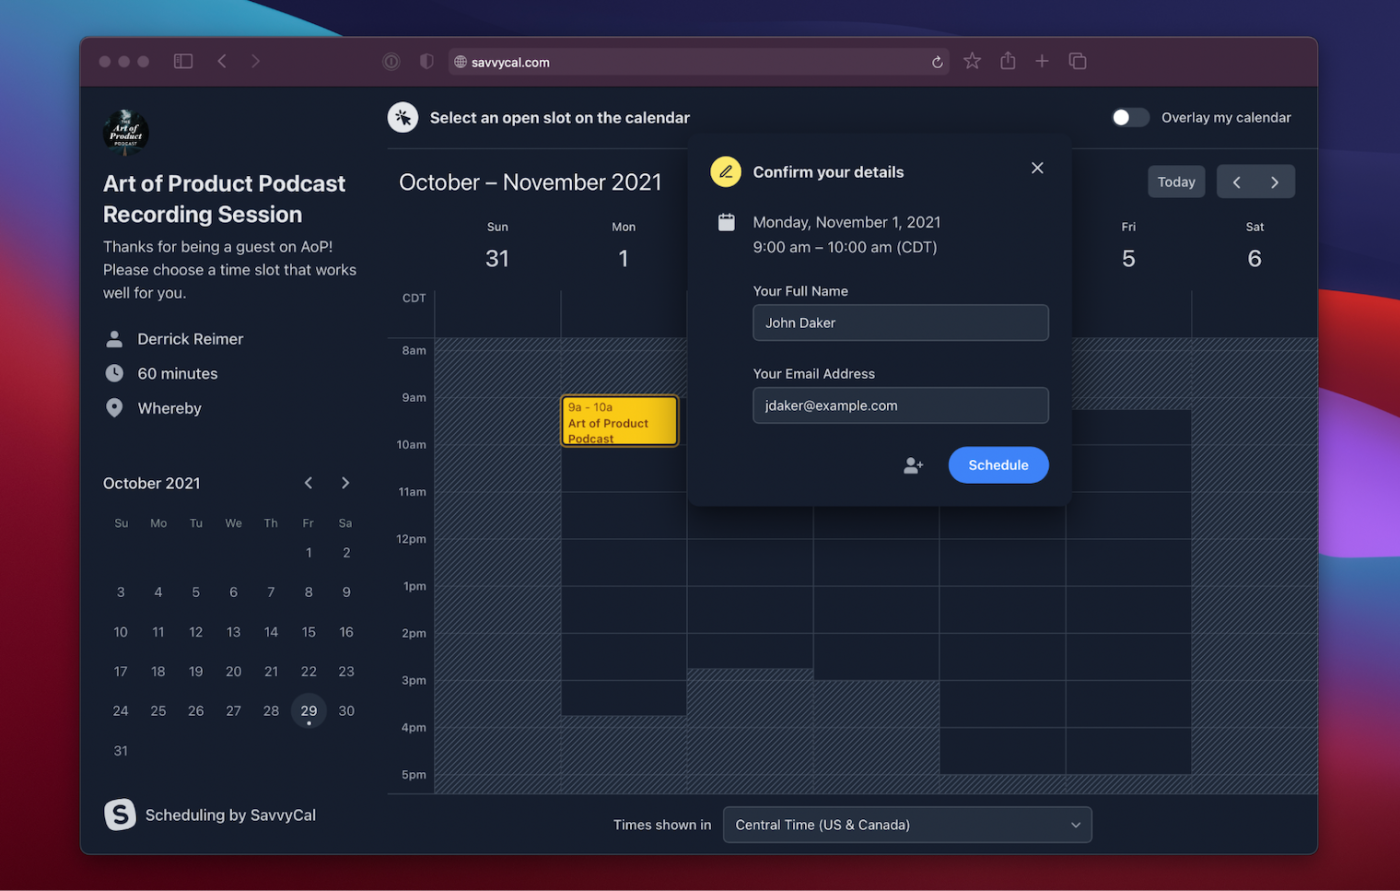 A screenshot of SavvyCal as Derrick Reimer uses it to schedule guests for Art of Product podcast sessions.